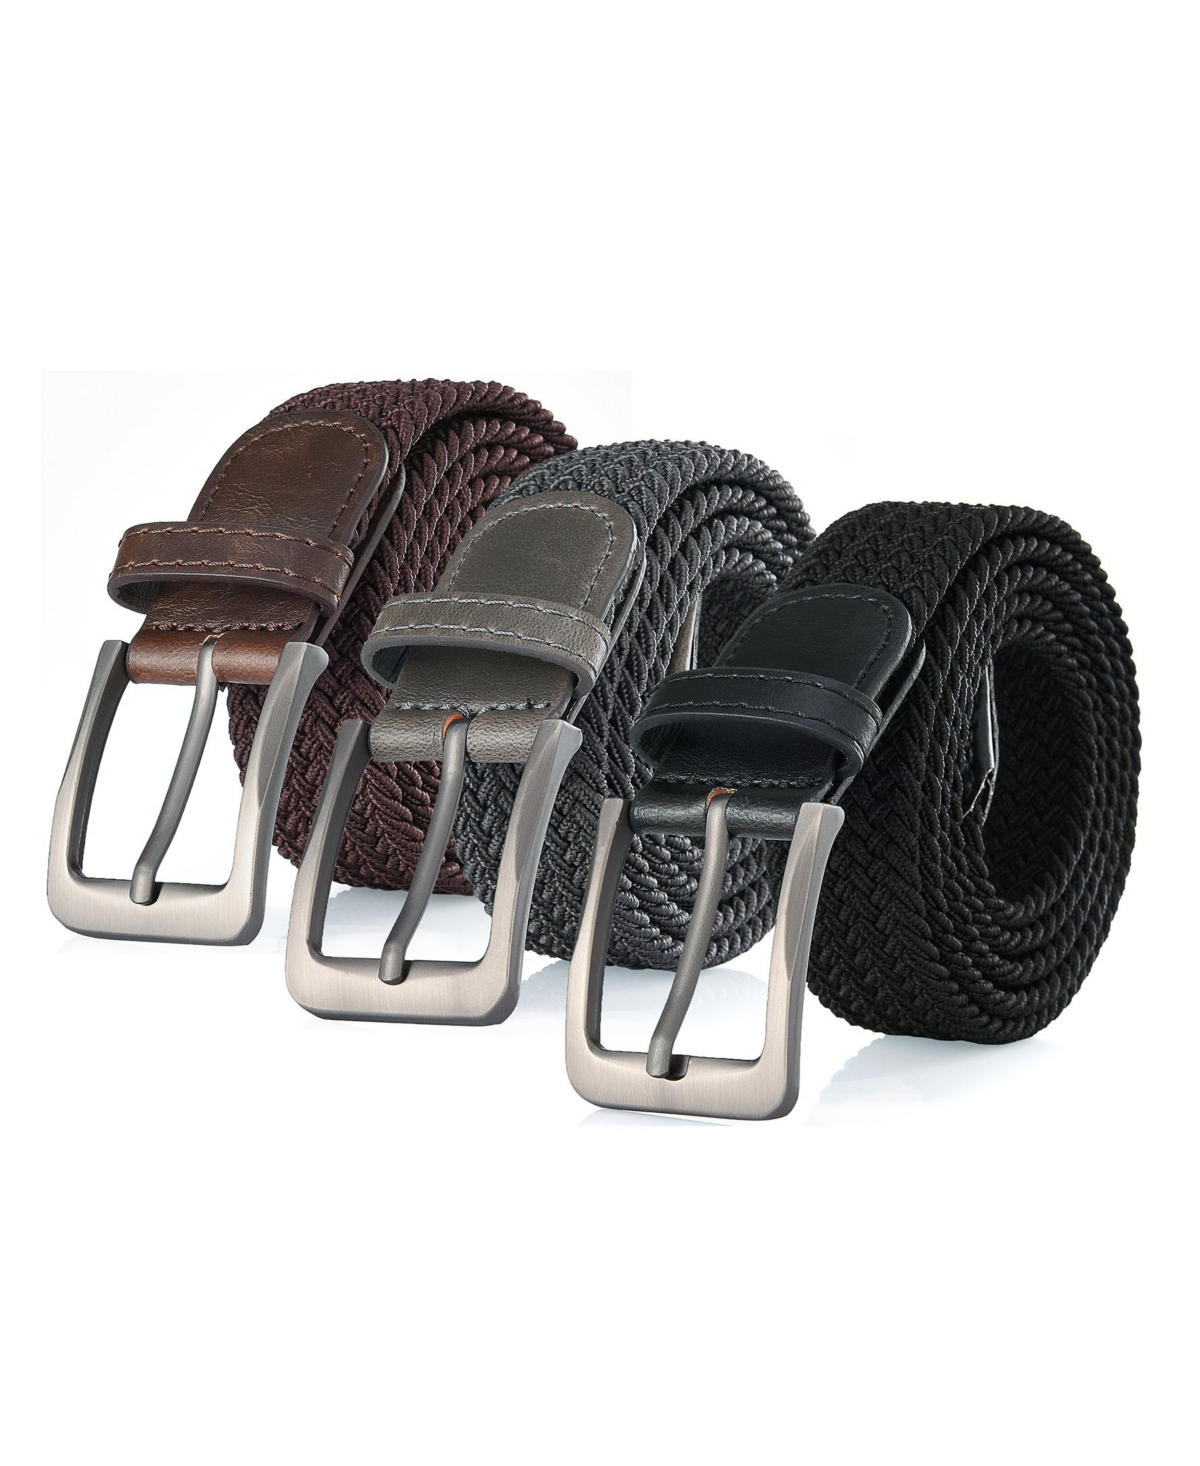 Men's Elastic Braided Stretch Belt for Big & Tall Pack of 3 - Black/brown/gray